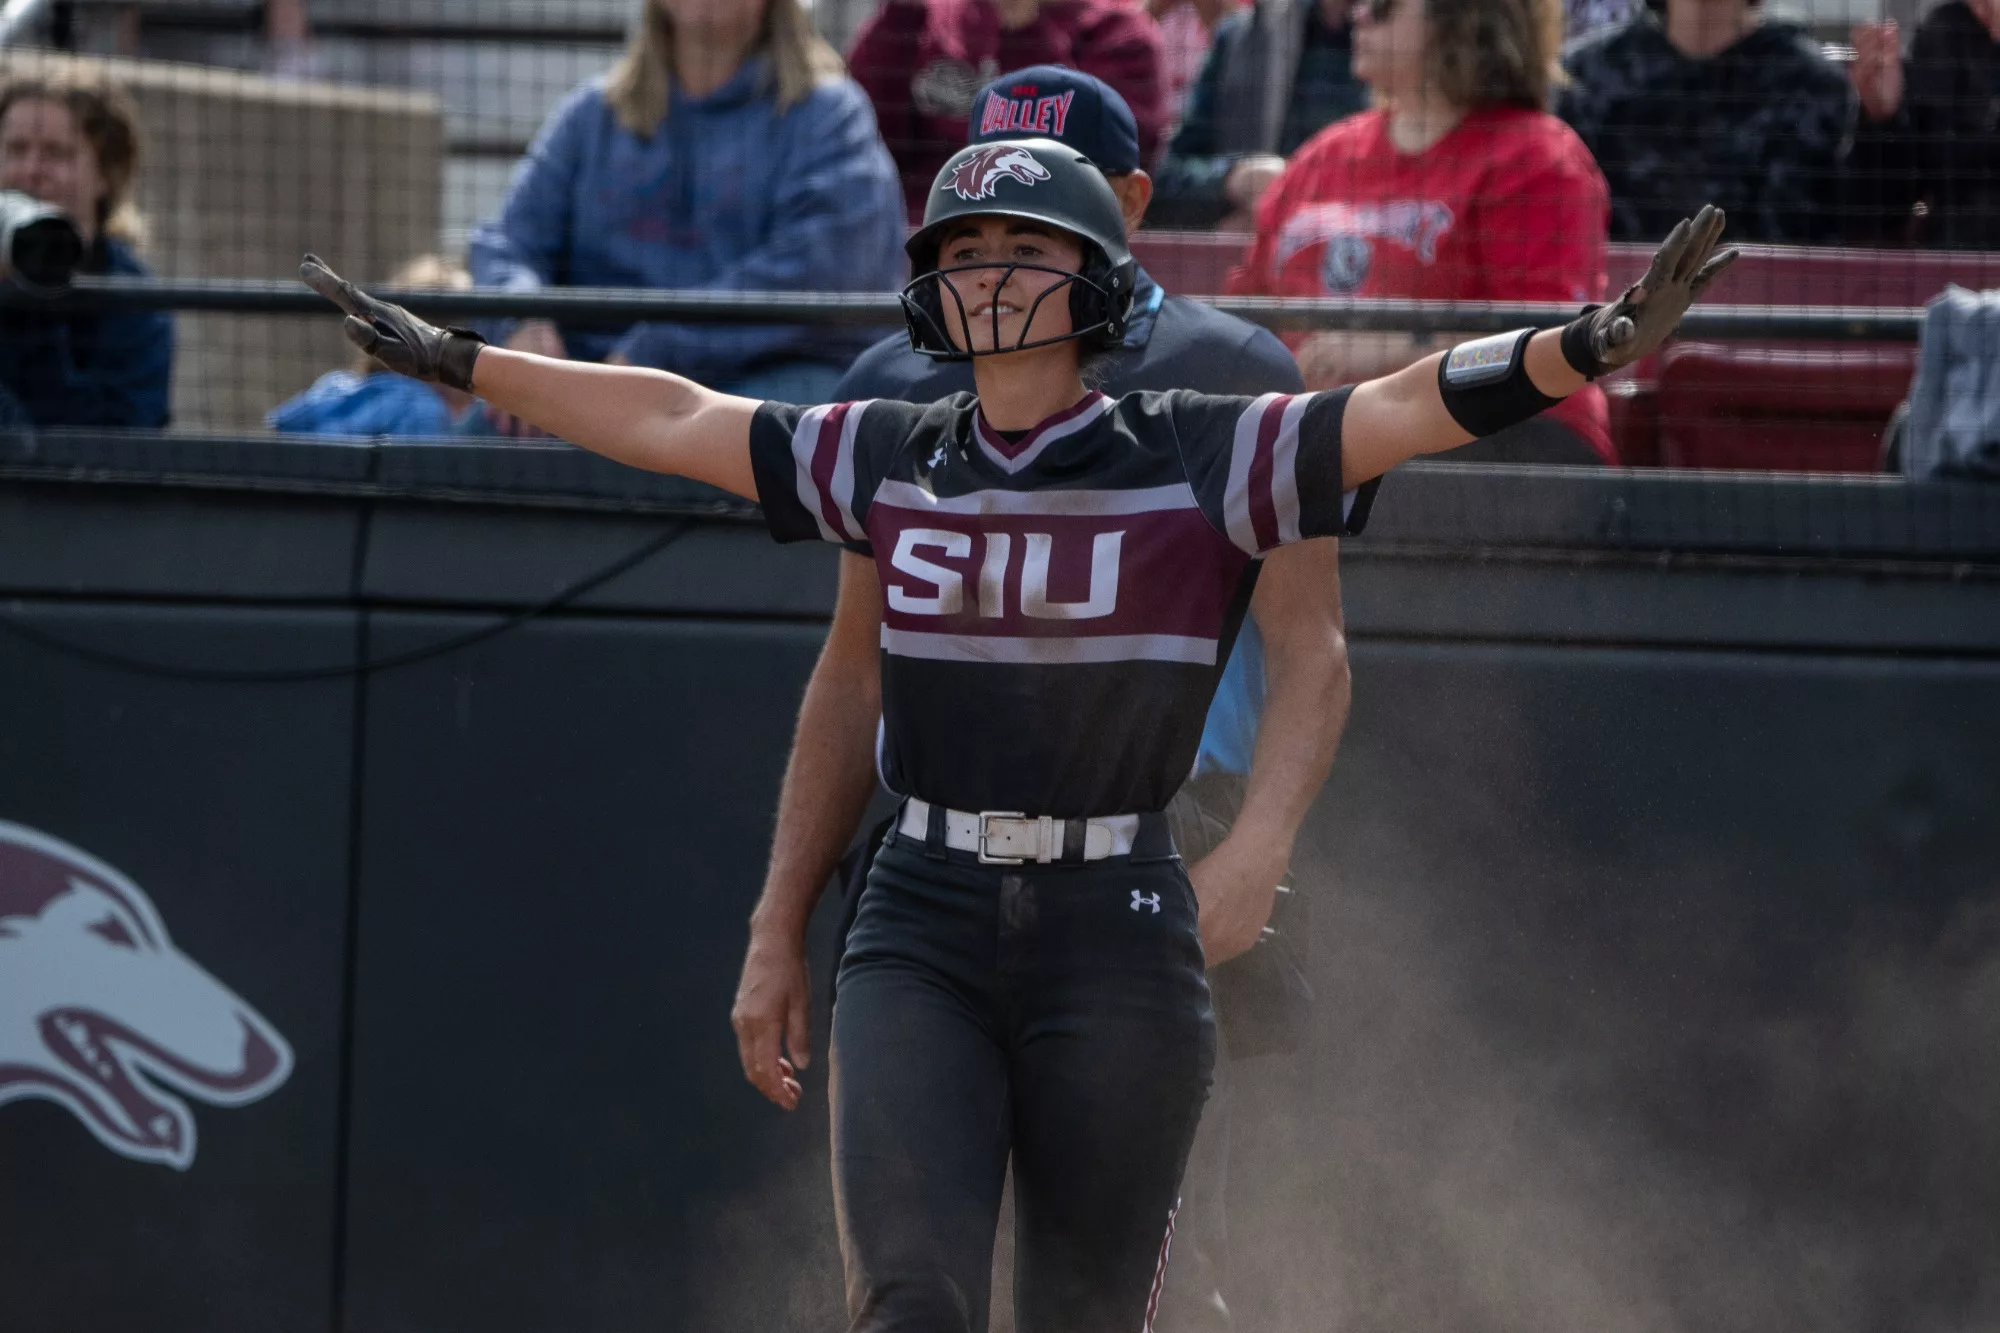 Saluki Softball star Jackie Lis to compete in Canada Cup international softball series for second summer in a row